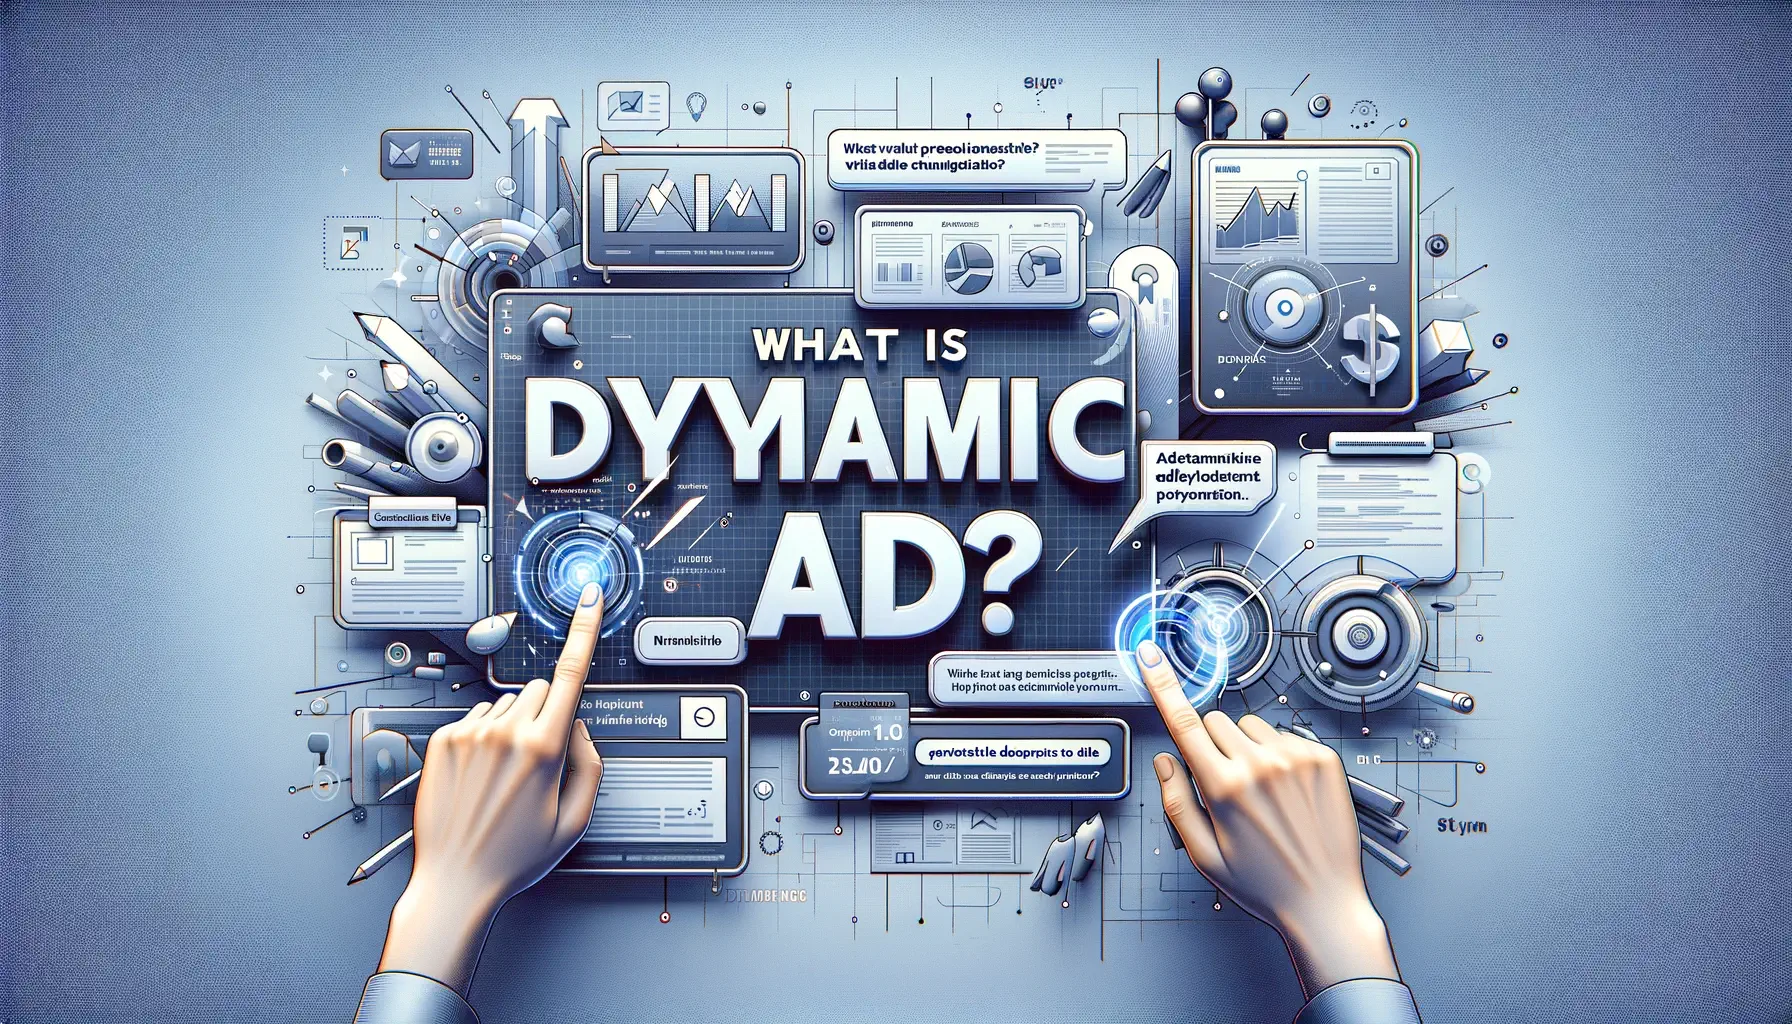 DALL·E 2024-02-22 17.43.12 - Create a visually engaging featured image for a blog titled _What are dynamic ads__, sized at 1920 by 1080 pixels, without any text. The image should (1)